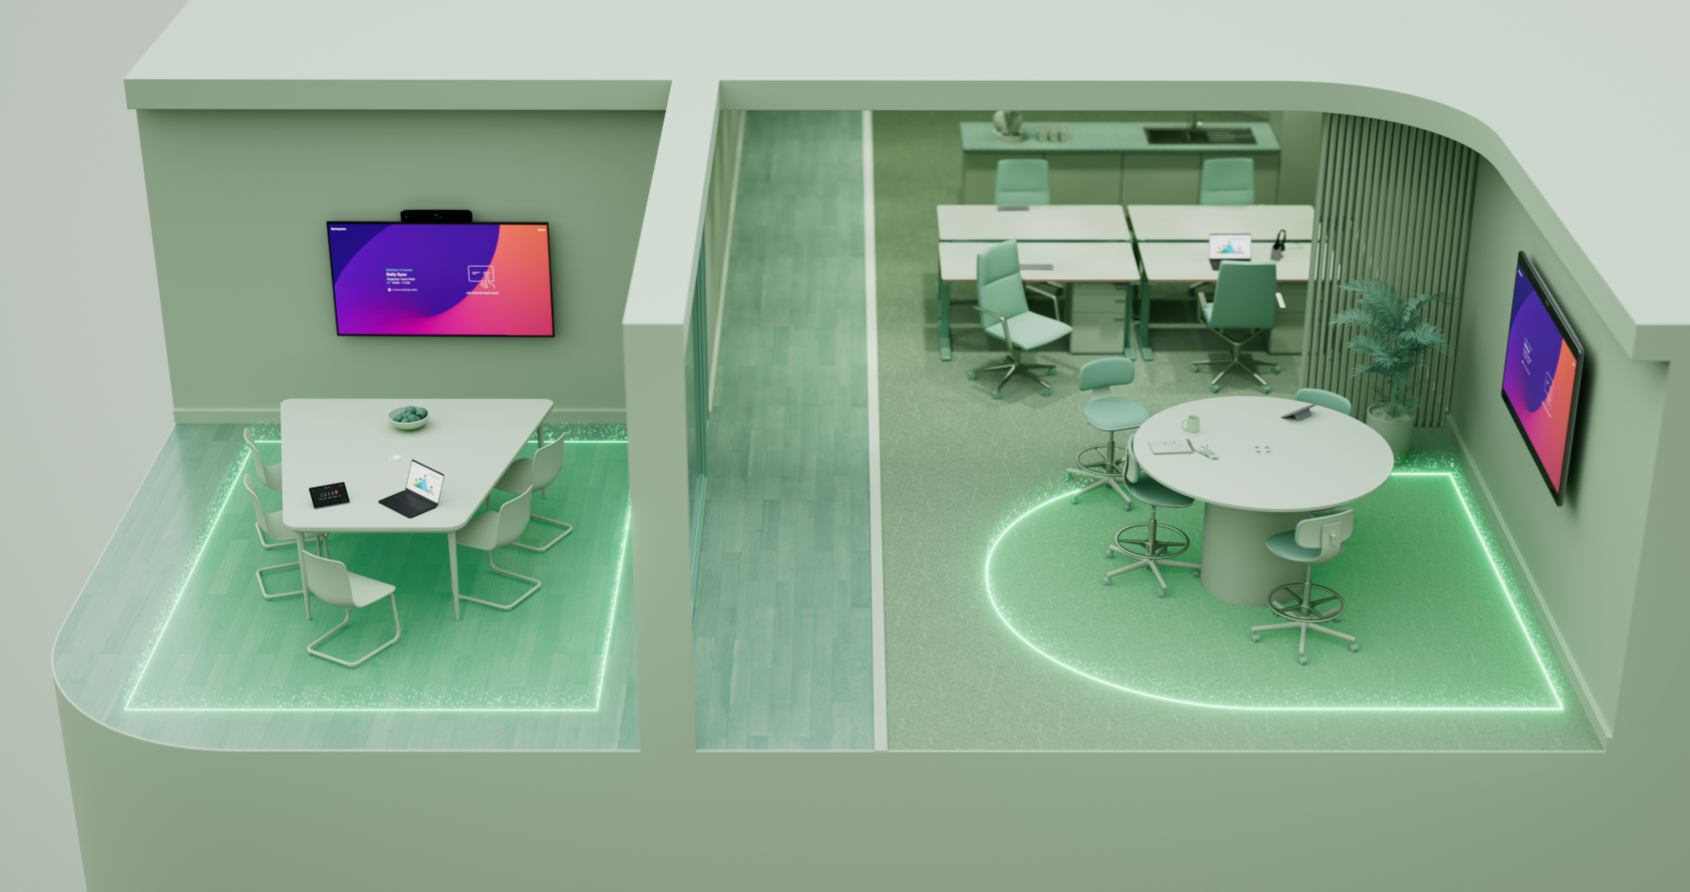 Cisco’s Cinematic Meetings capabilities leverage an NVIDIA Jetson system-on-module to deliver collaboration experiences that reduce the impact of distance.